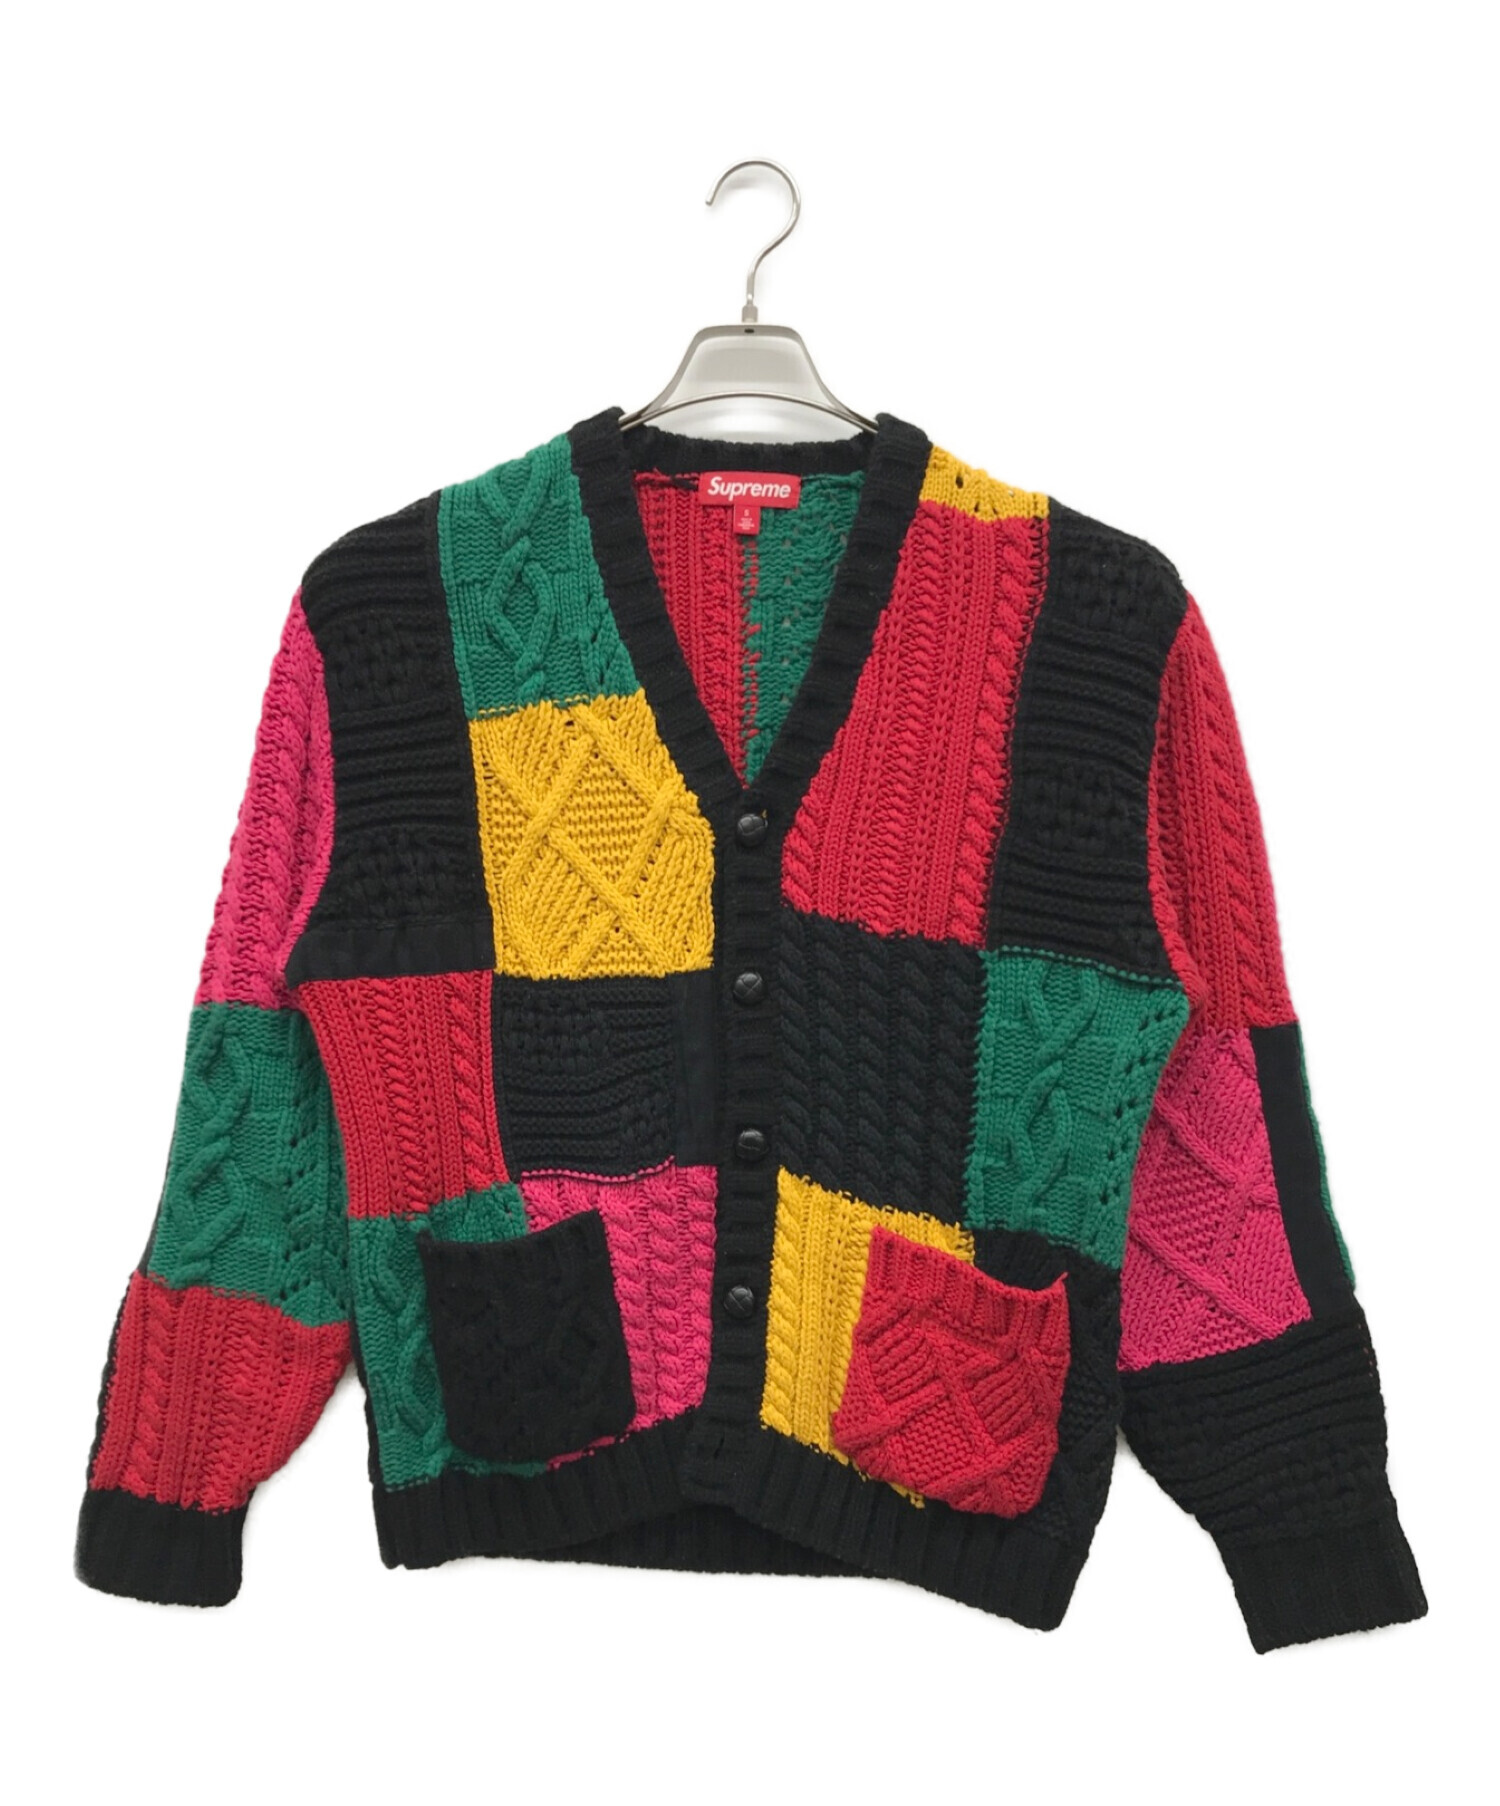 【M】Supreme Patchwork Cable Knit Cardigan